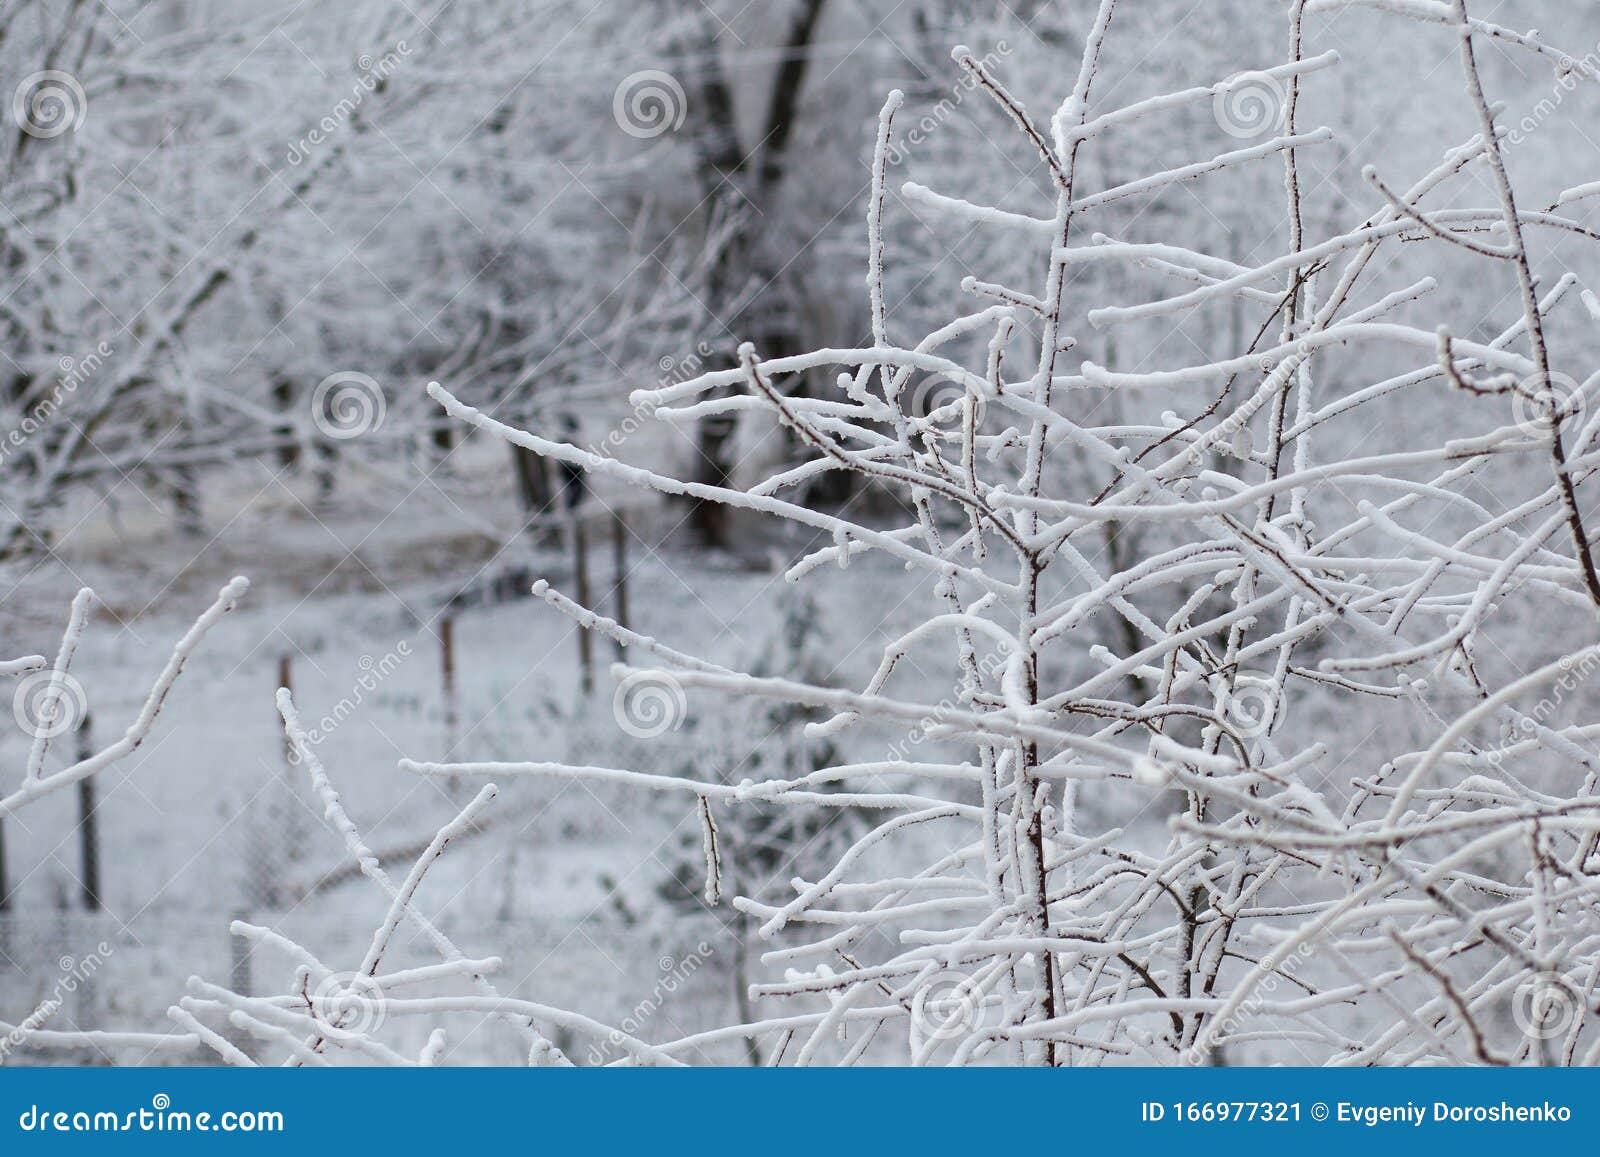 Beautiful Branches Of Cherry Tree Covered With Even Layer Of White Fluffy Snow Stock Image Image Of December Hoarfrost